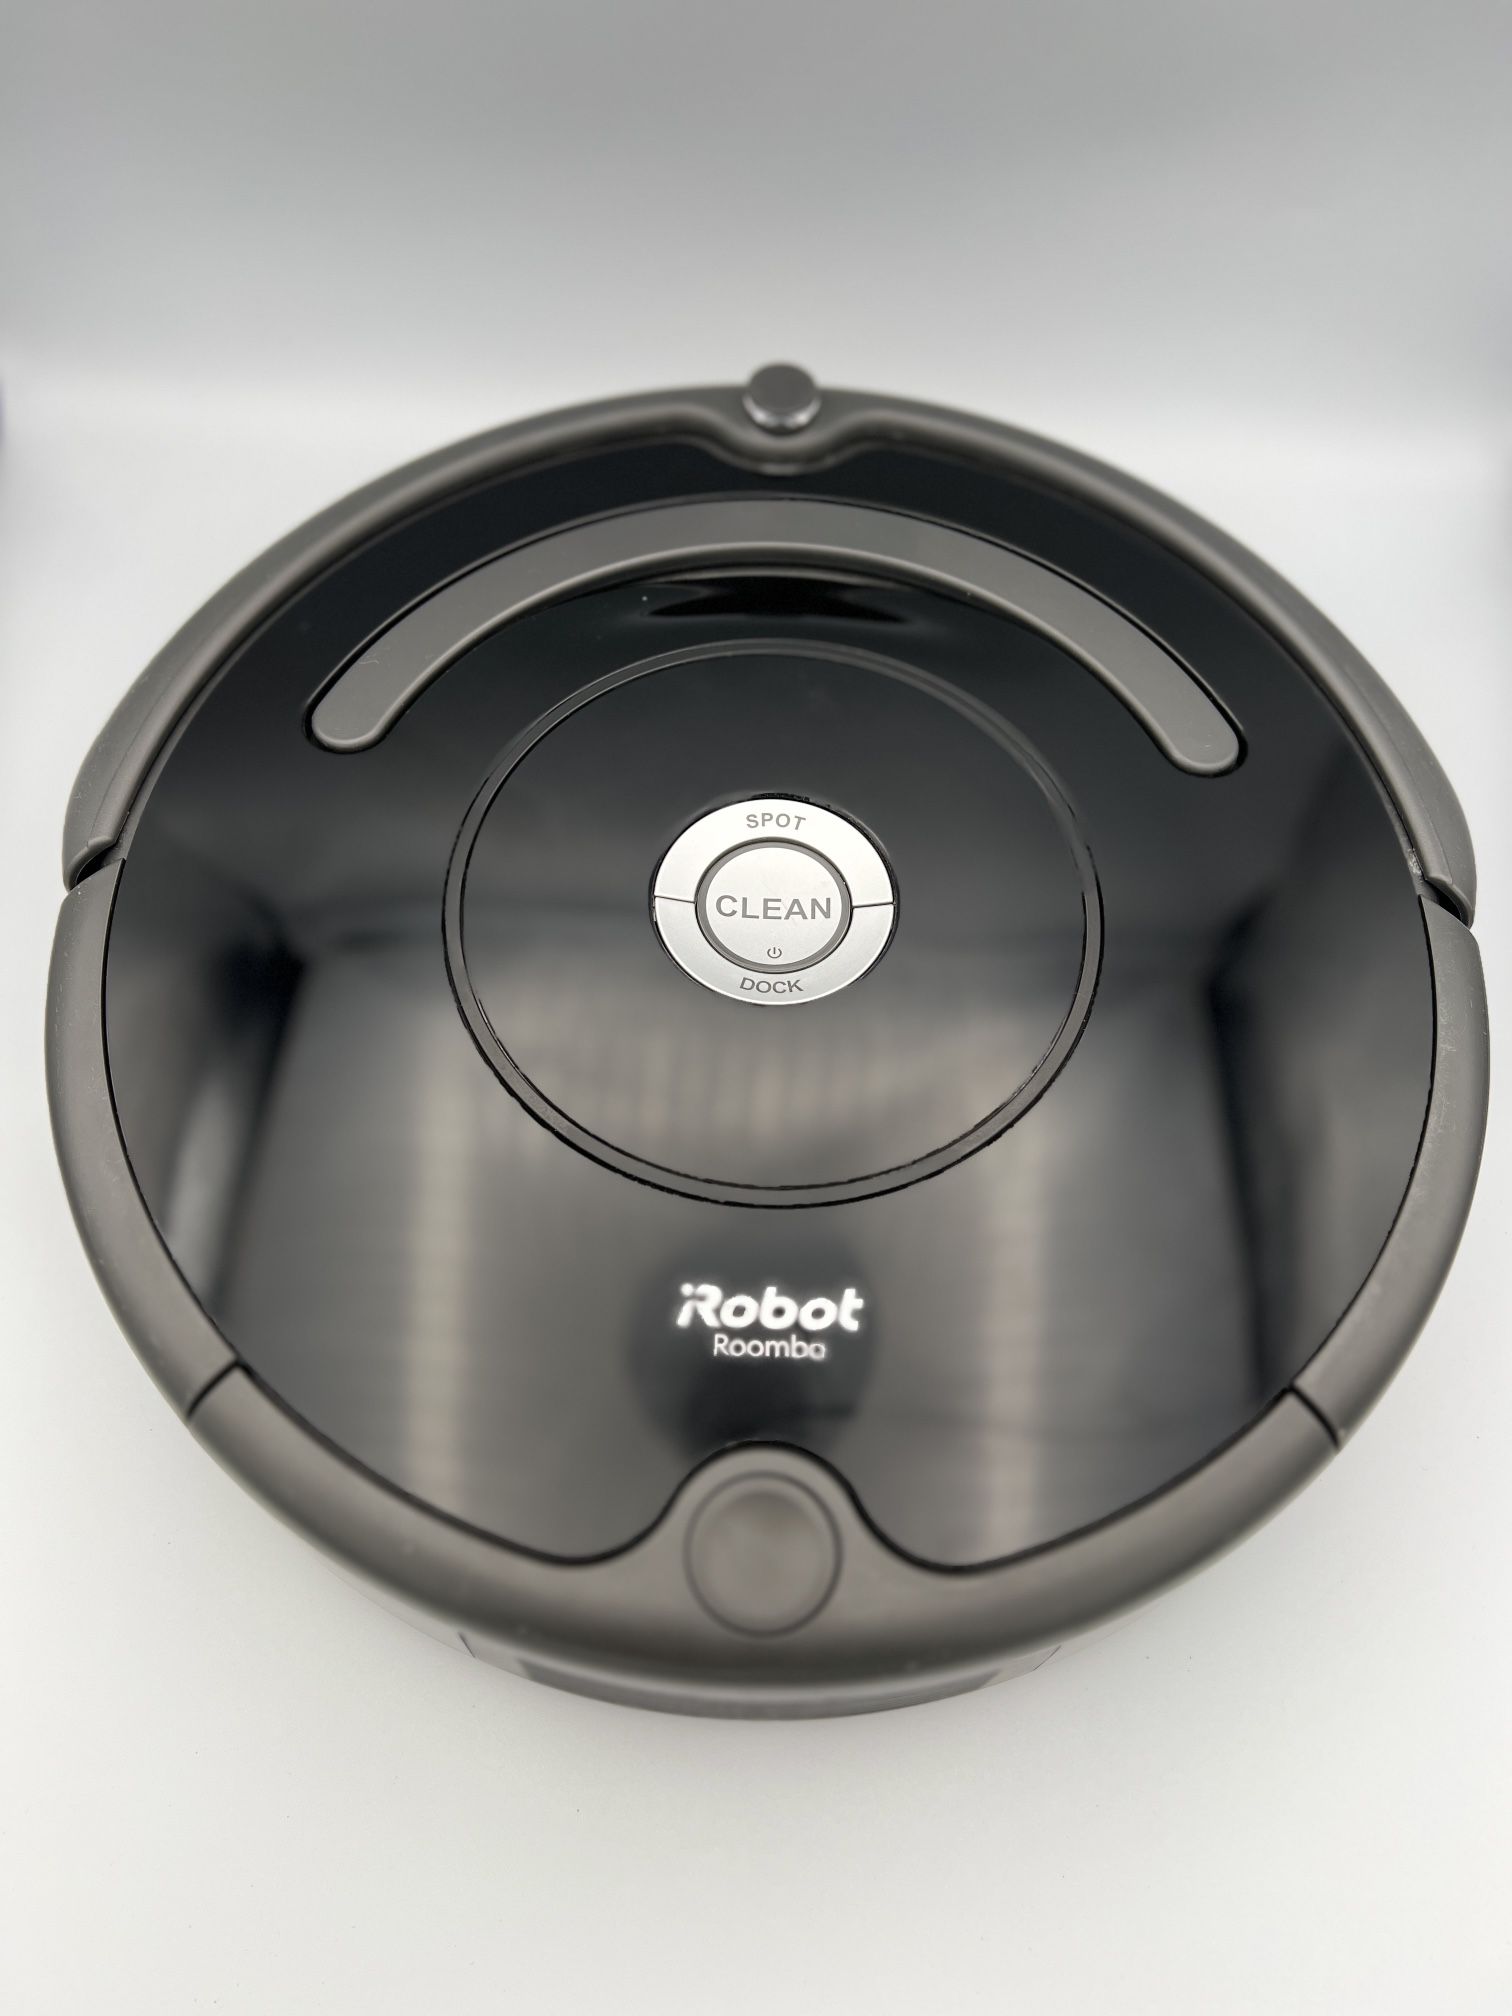 iRobot Roomba 679 Robot Vacuum  Lightly Used W/ Extra Parts Works ( No Battery)